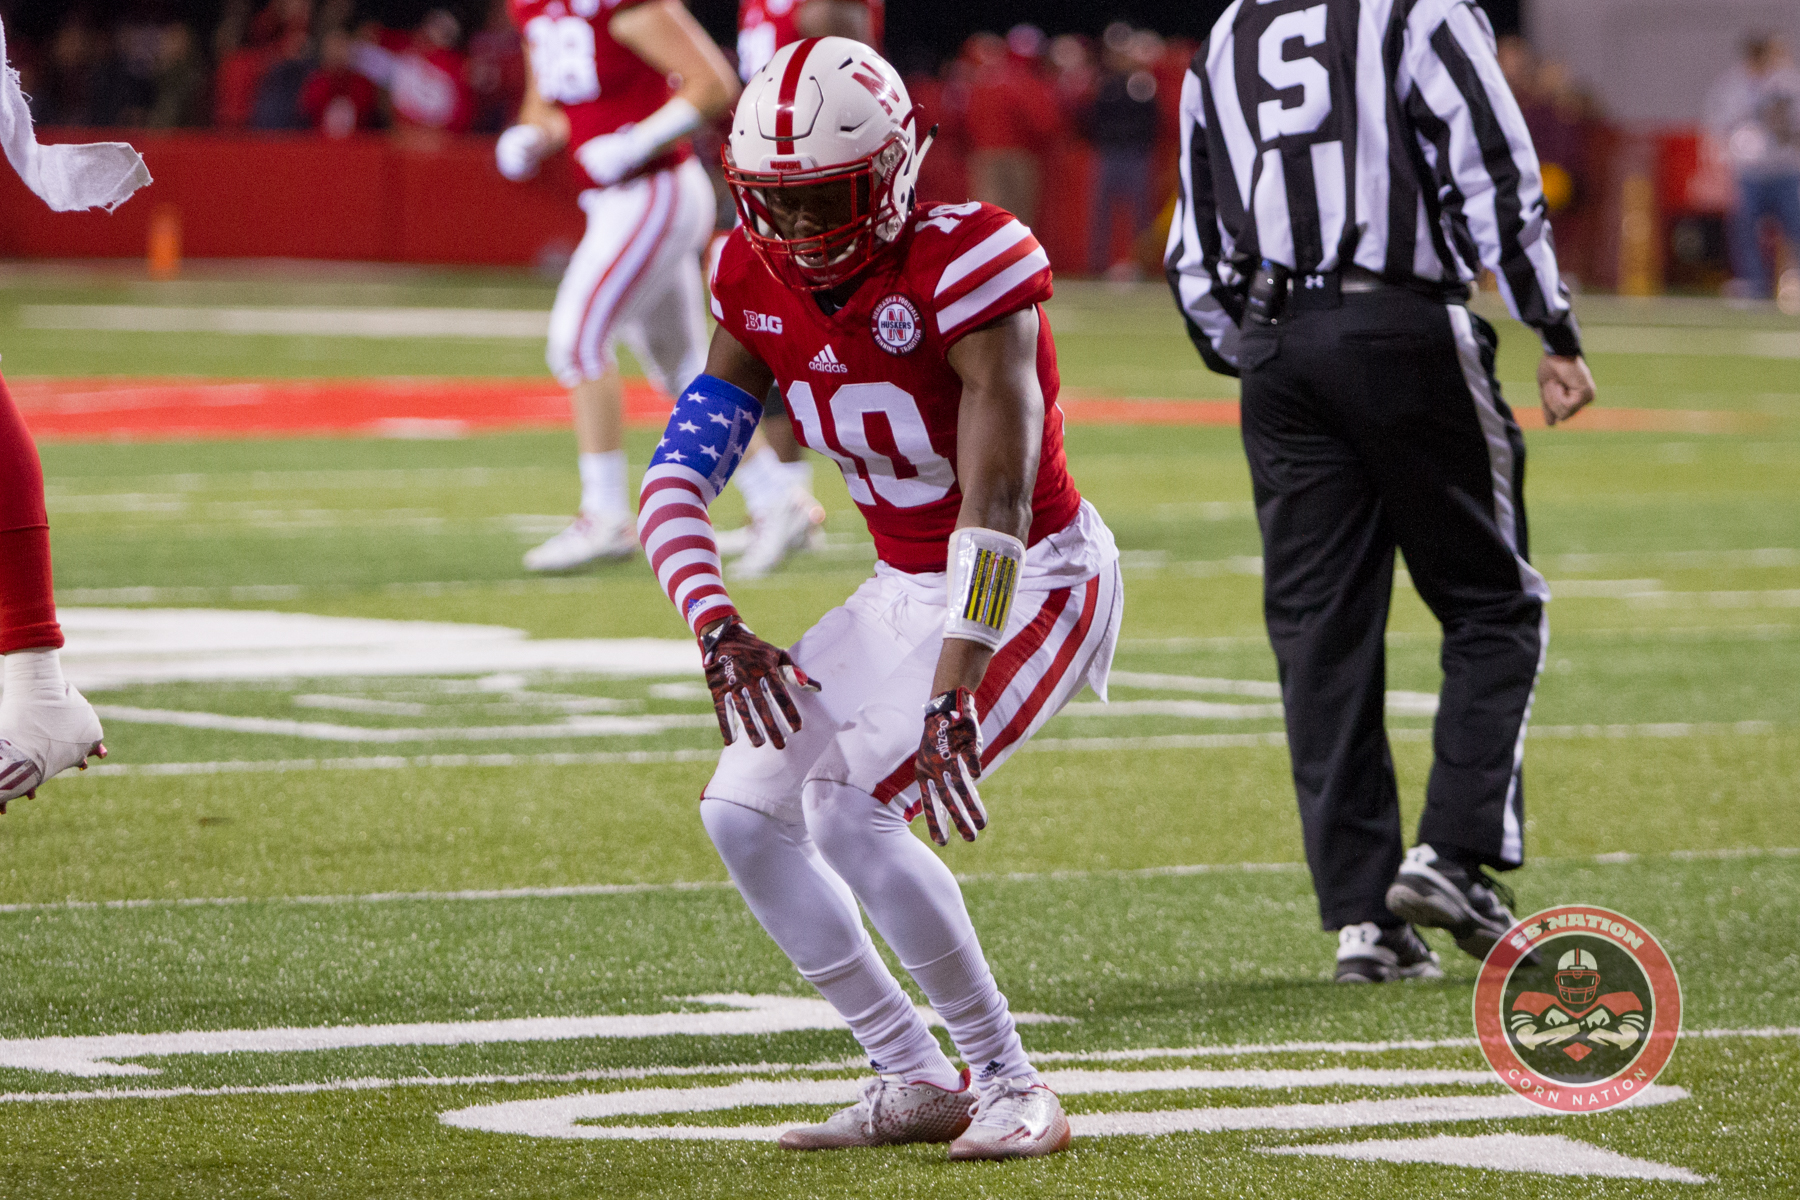 Gallery: Huskers Grate for Eight